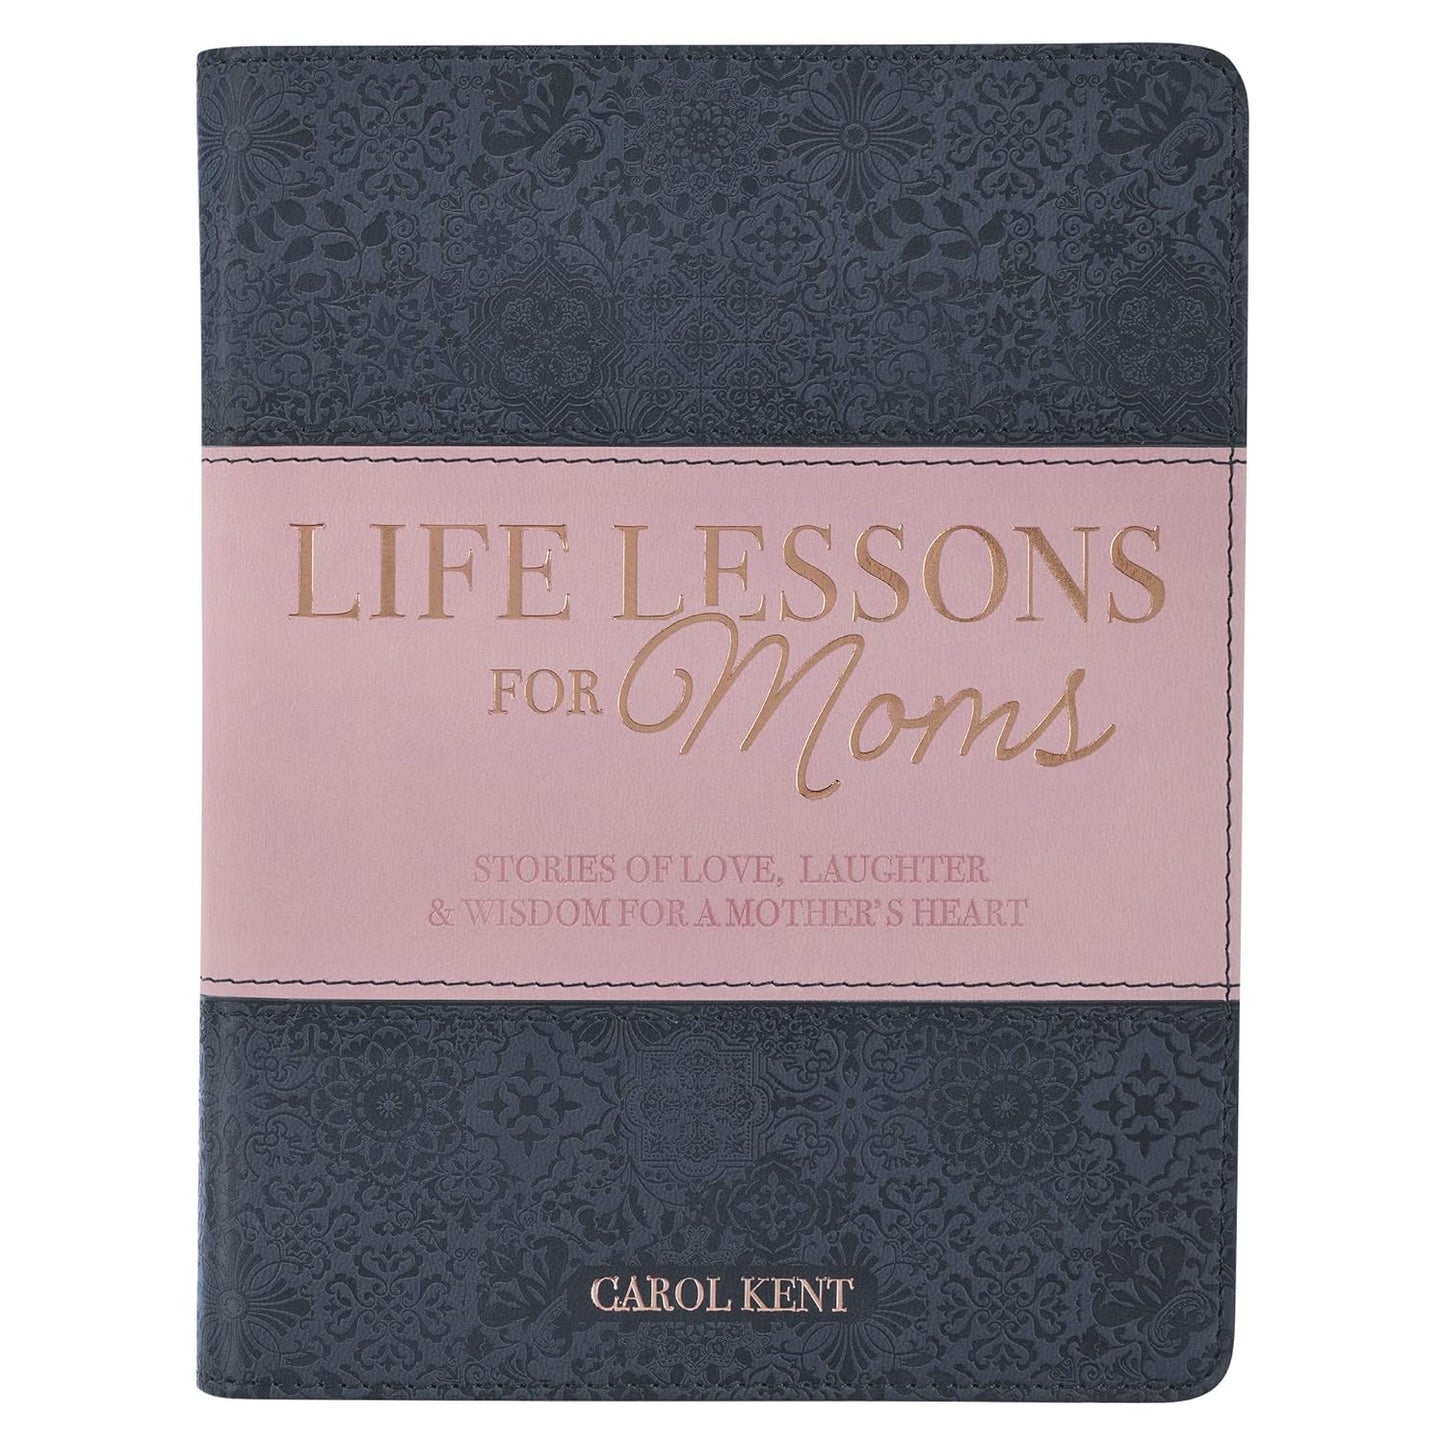 Life Lessons for Moms:  Stories of Love, Laughter & Wisdom for a Mother's Heart